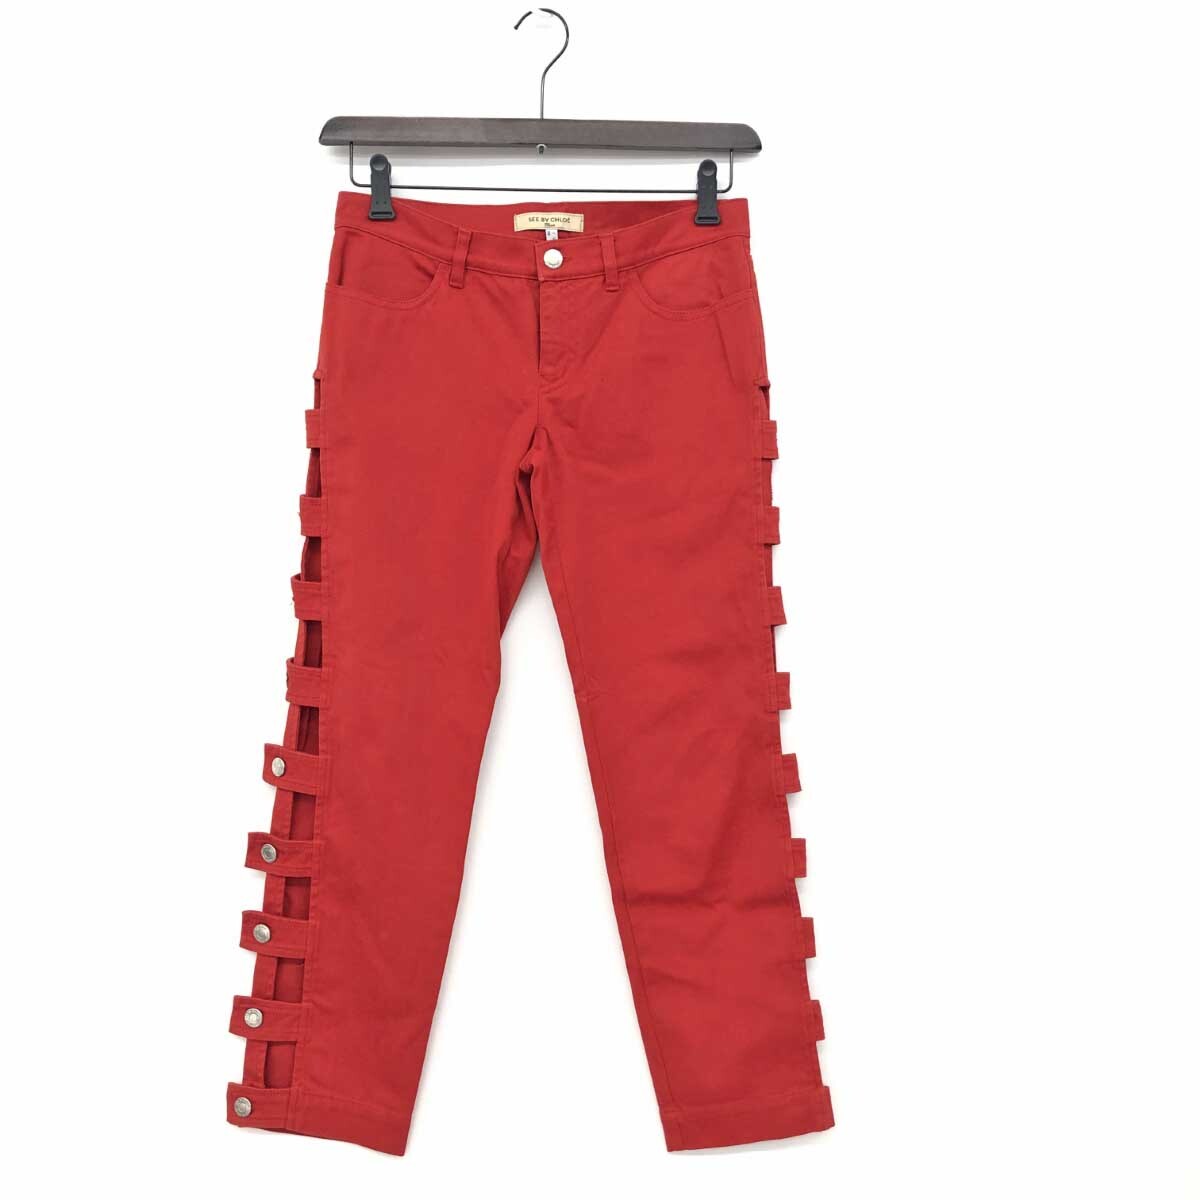  excellent *SEE BY CHLOE See by Chloe cropped pants size I38* red lady's bottoms side button 